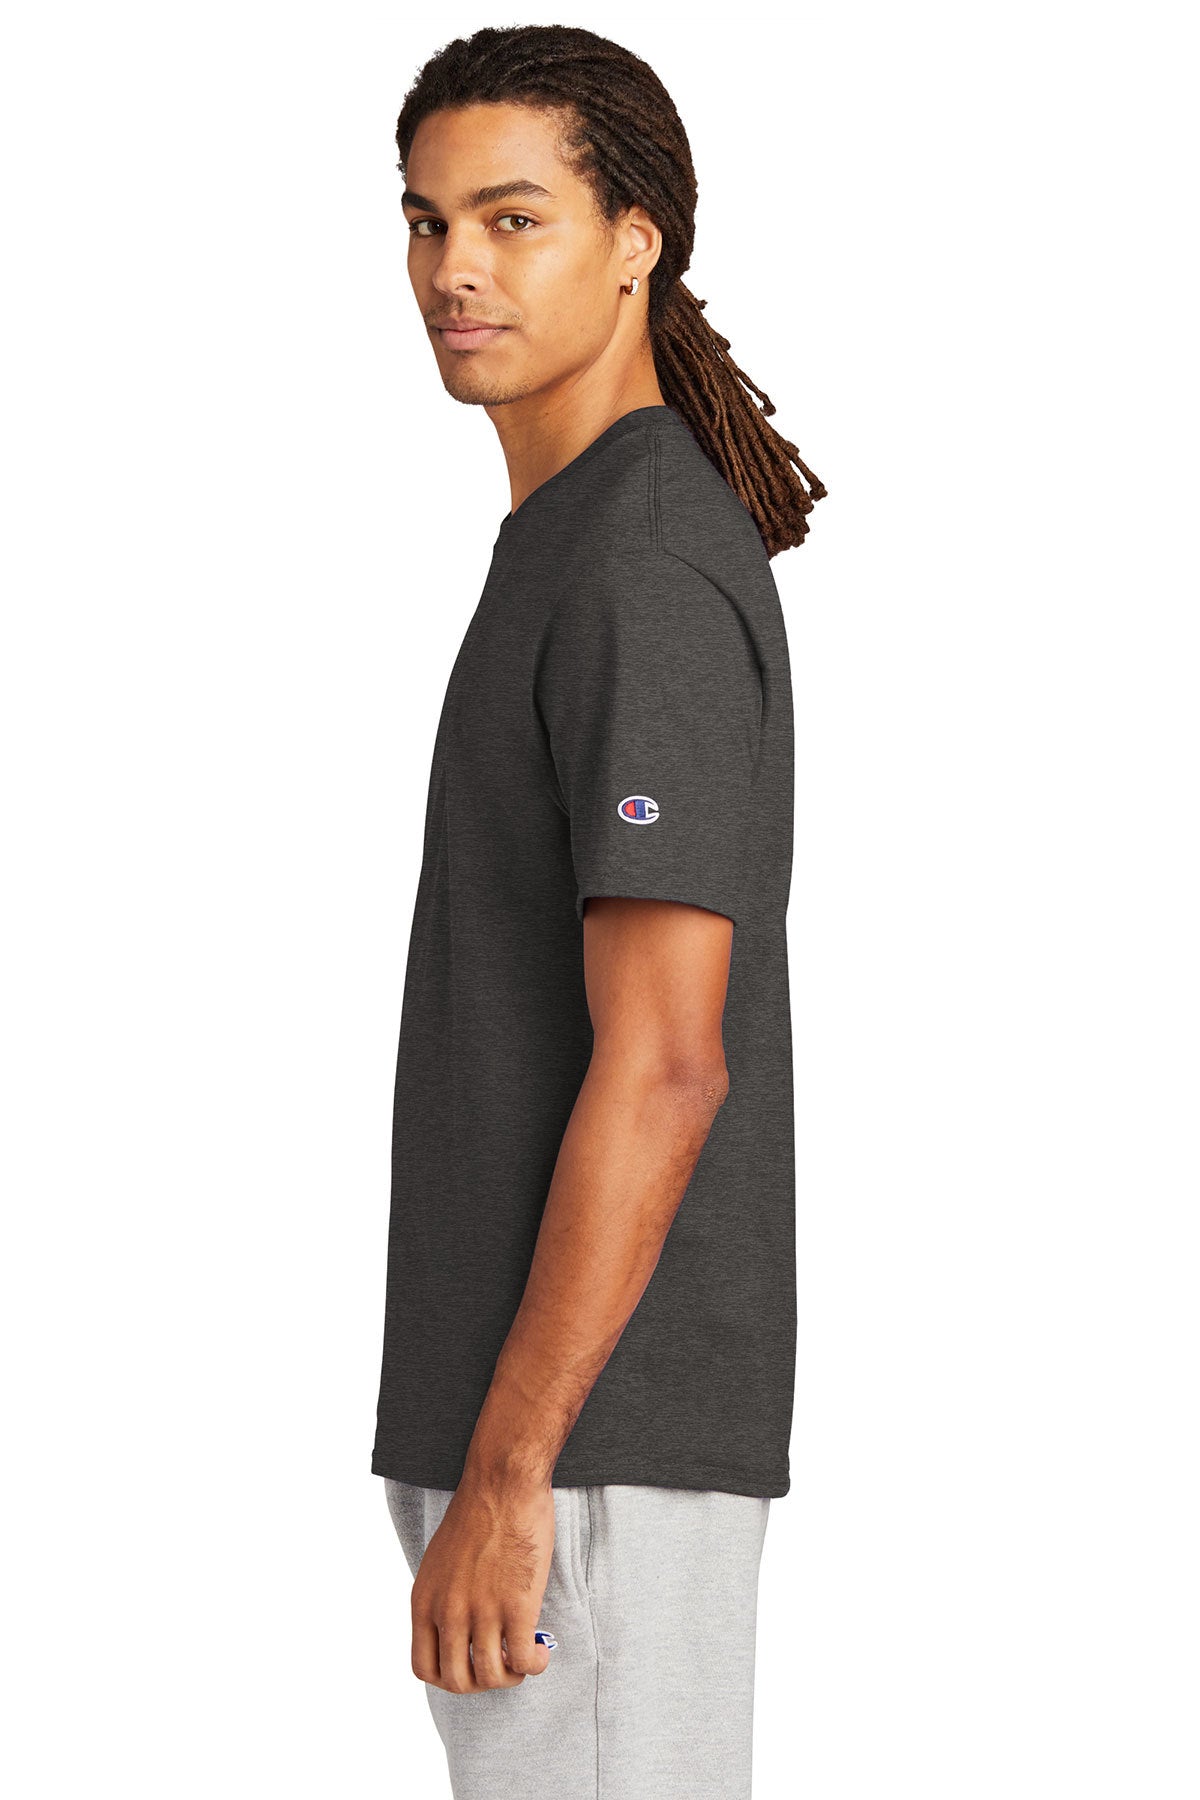 champion heritage jersey tee t425 s charcoal heather